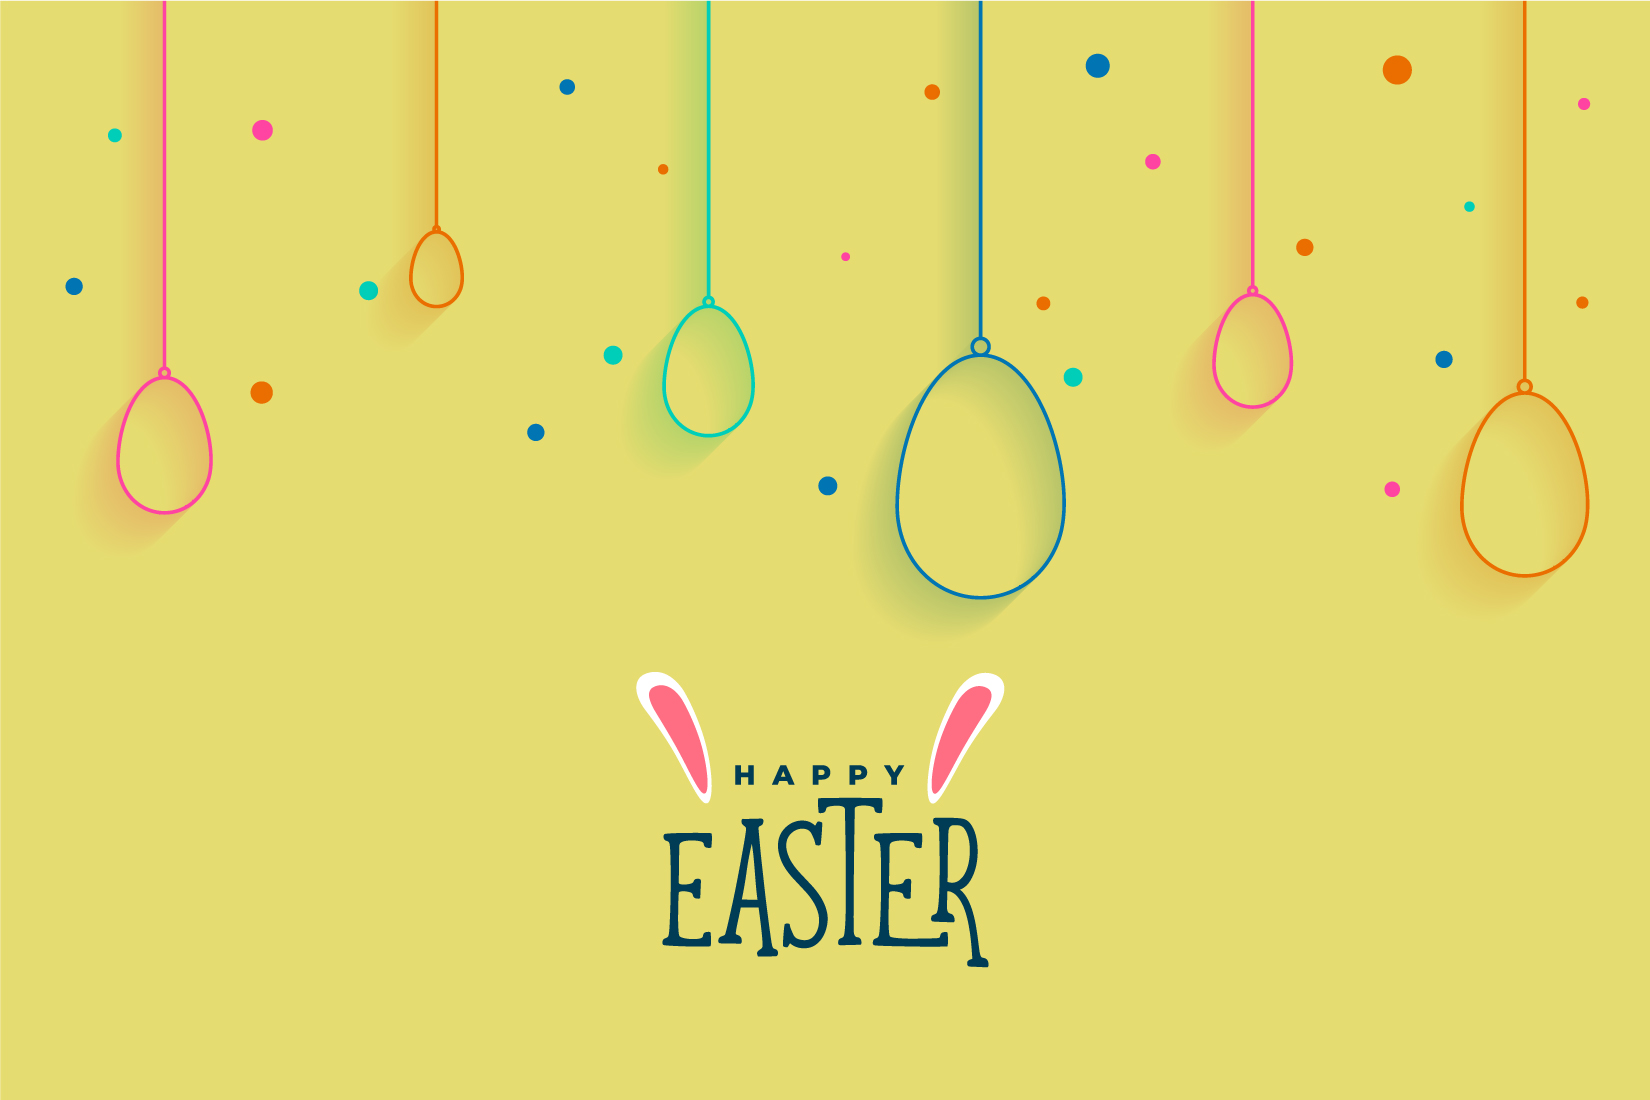 Happy easter card with eggs hanging from strings.